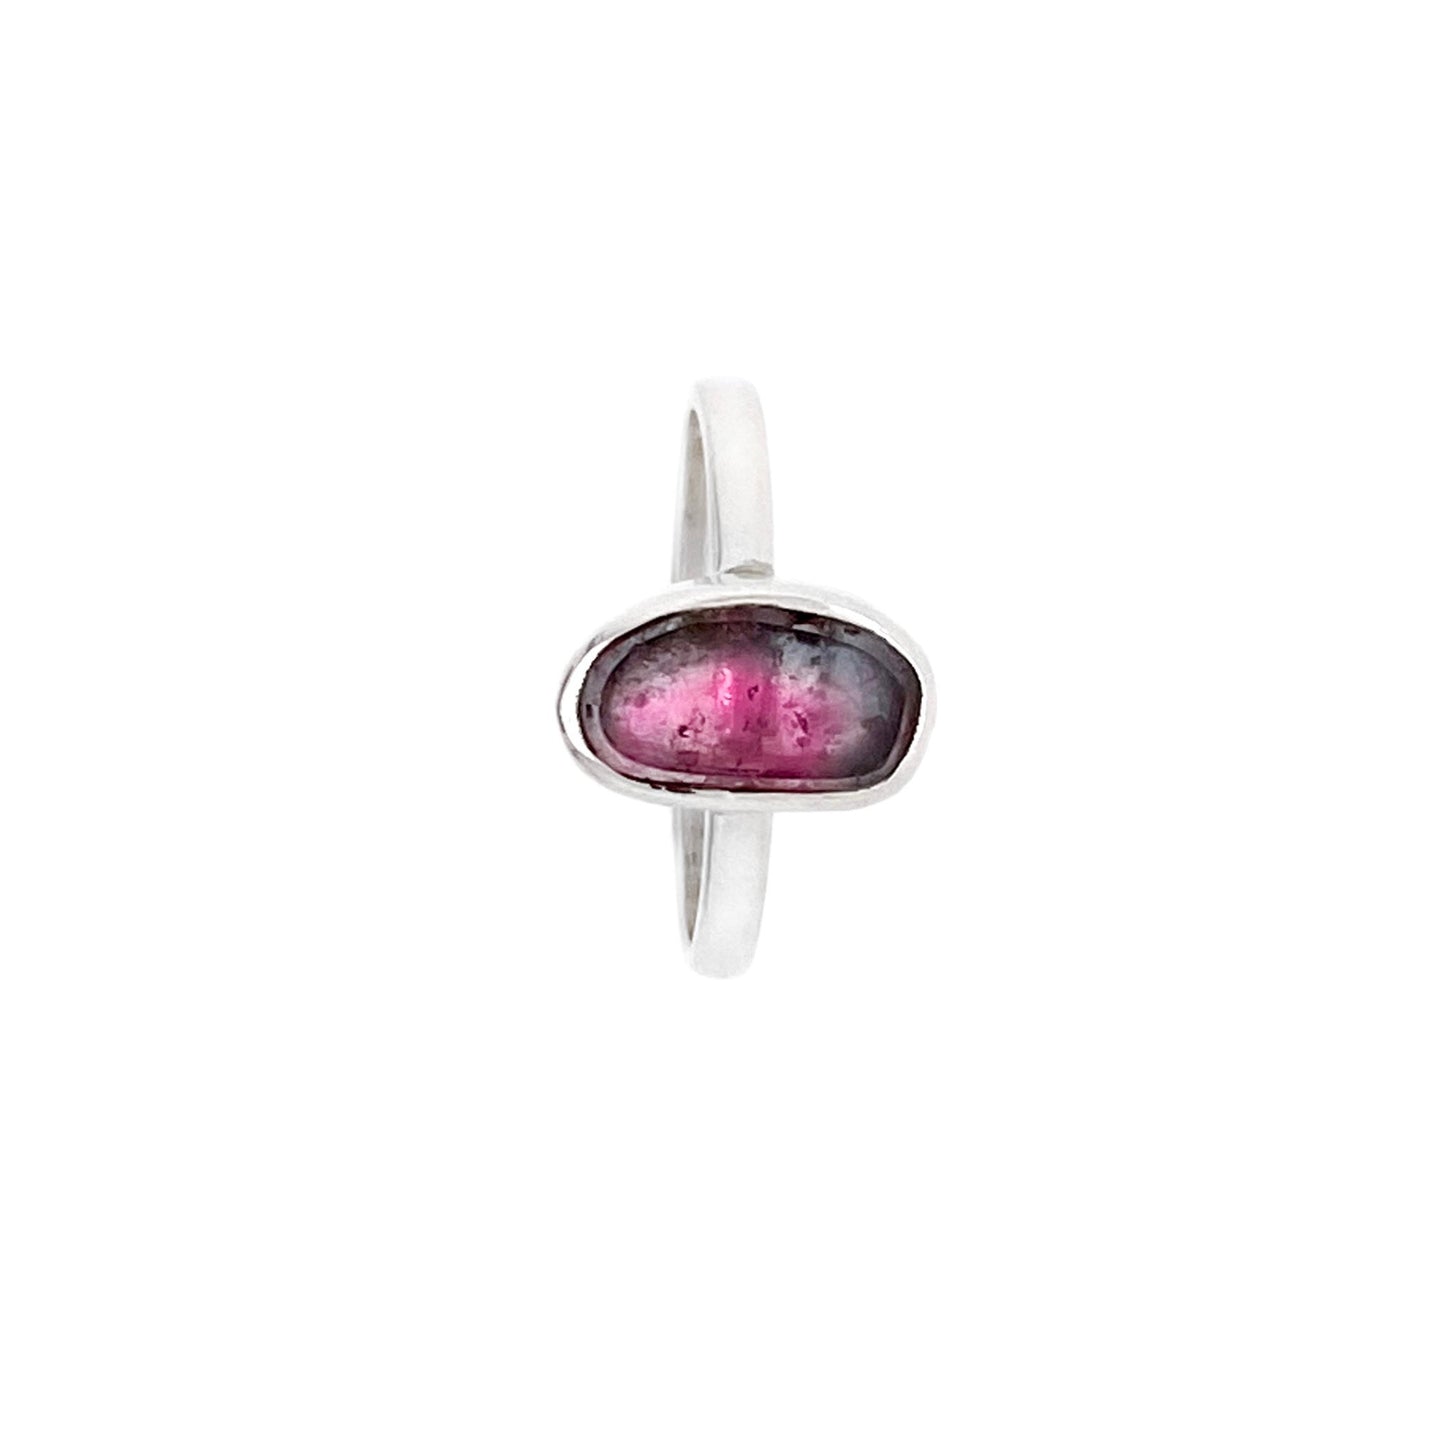 Watermelon Tourmaline Sterling Silver Ring - Twisted Earth Artistry